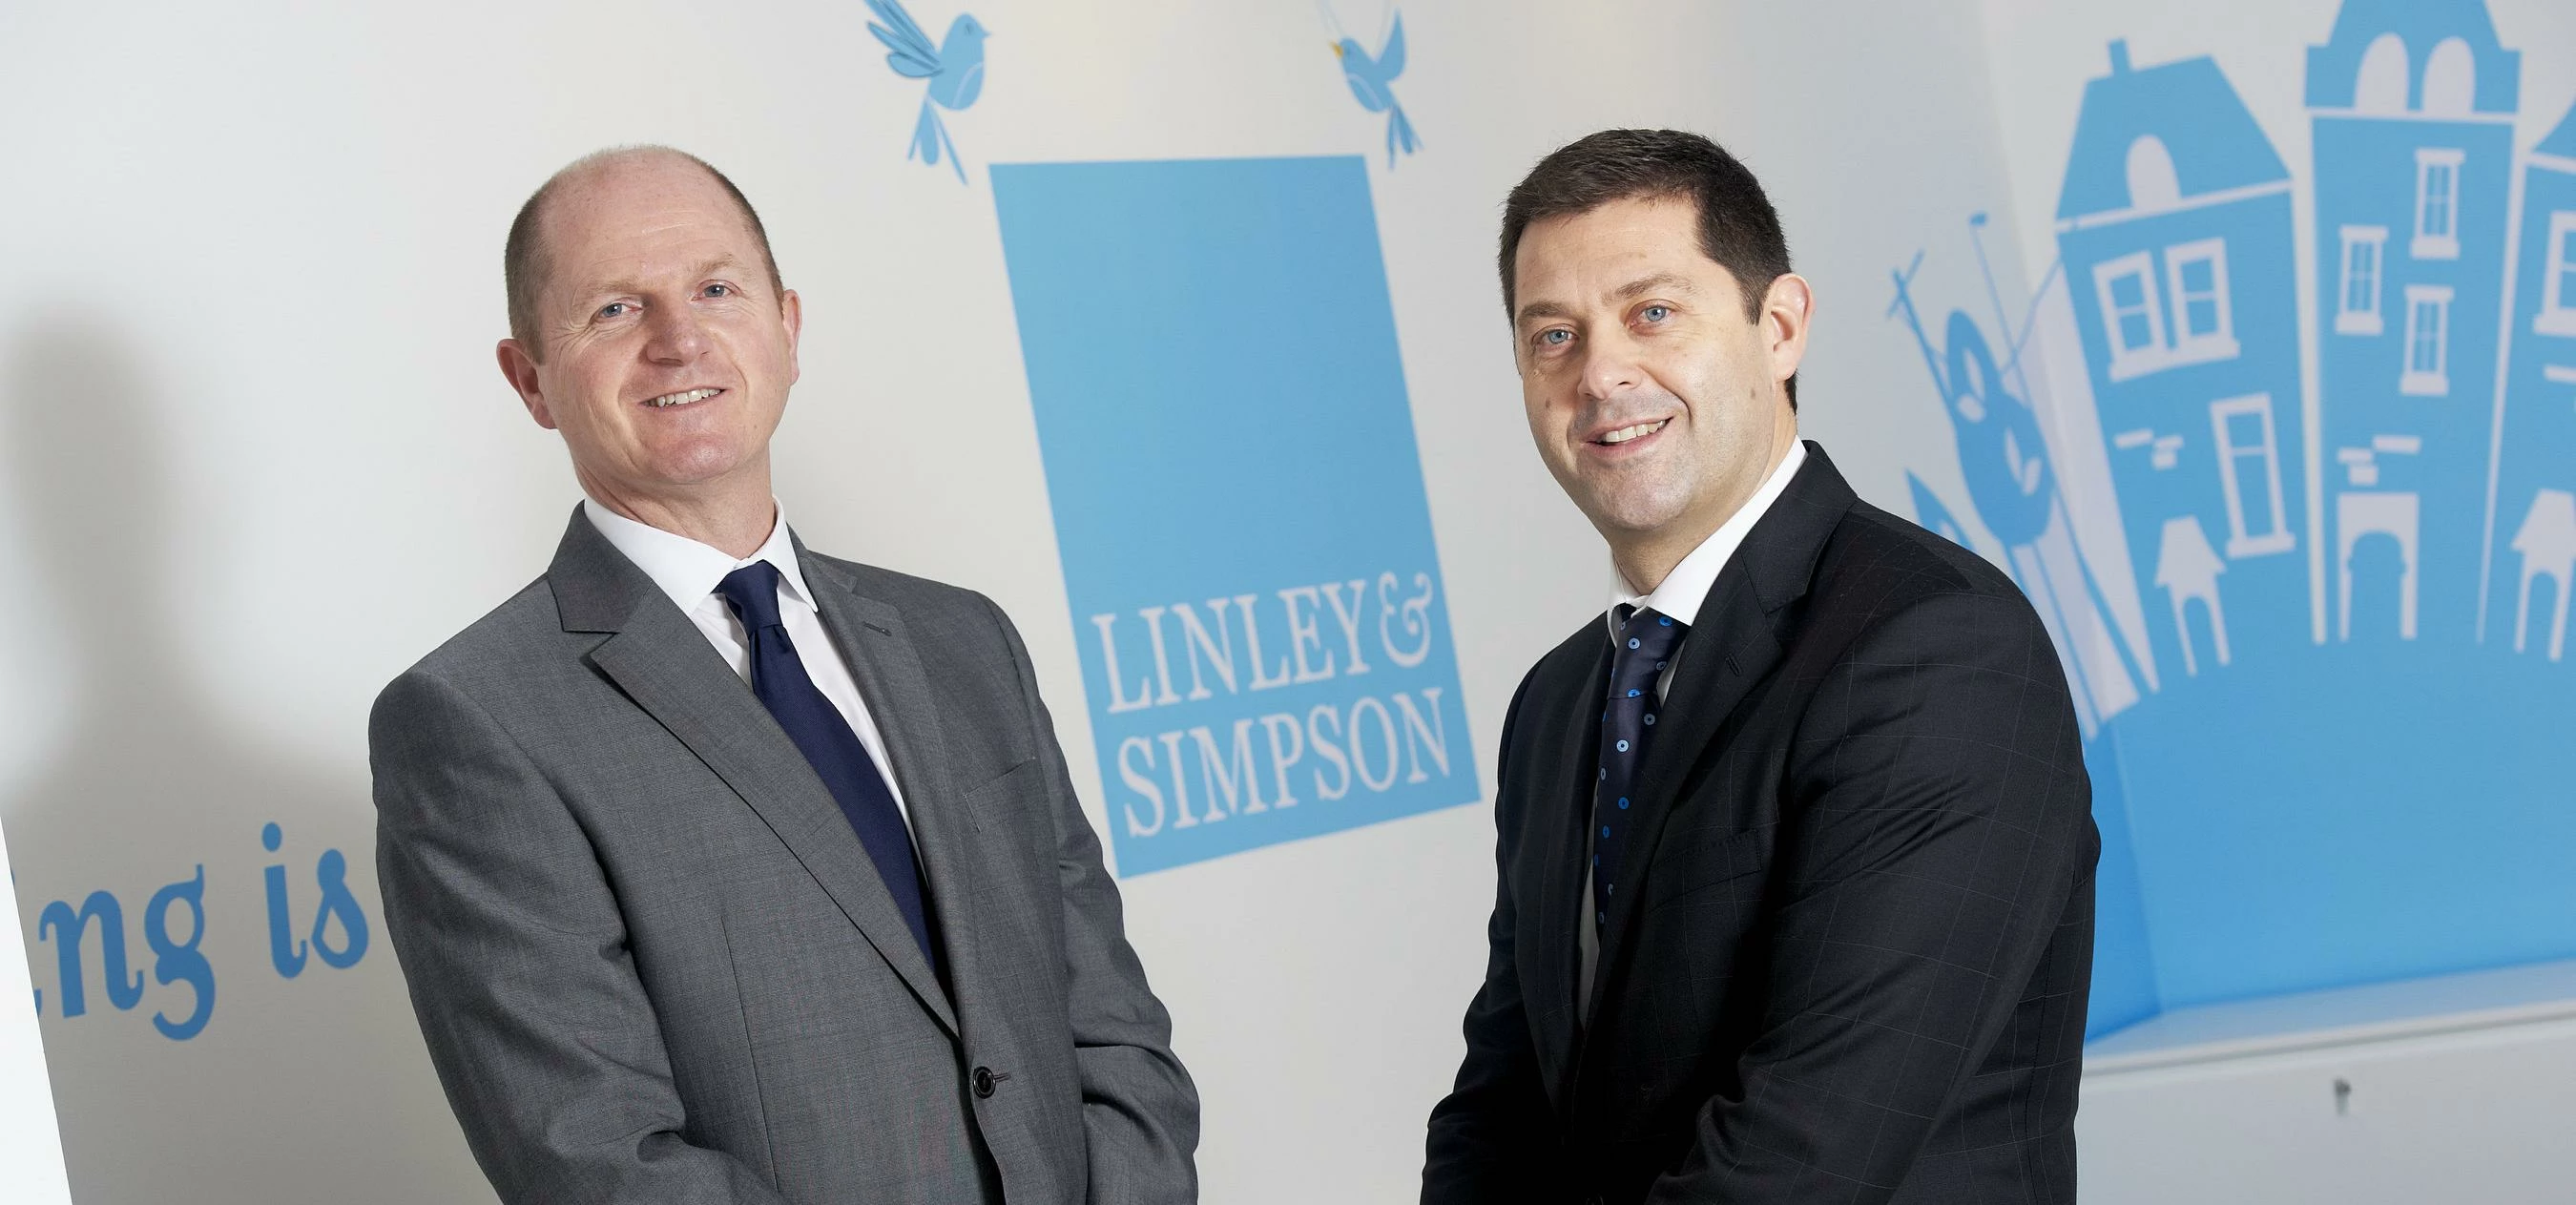 Will Linley and Nick Simpson, founders of in dependent residential letting agents Linley & Simpson, 